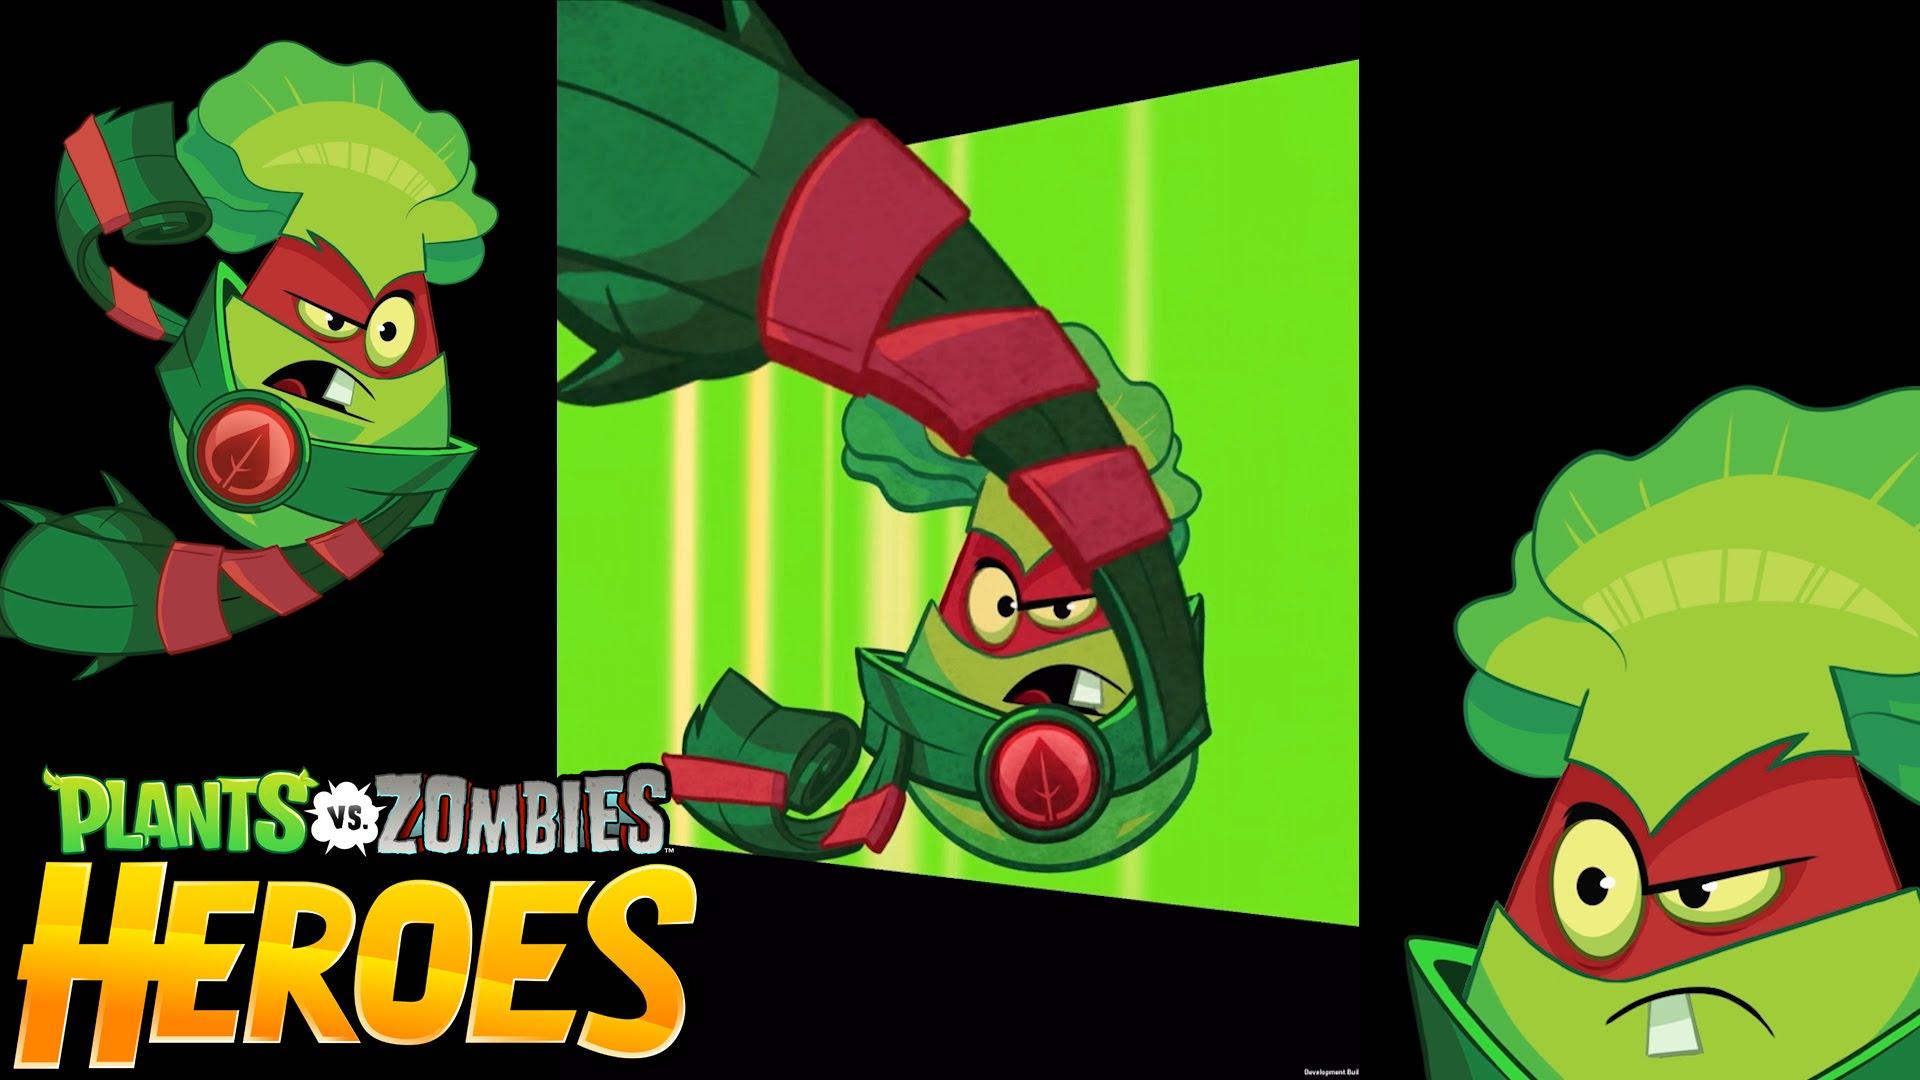 Plants vs Zombies Heroes will be a card game